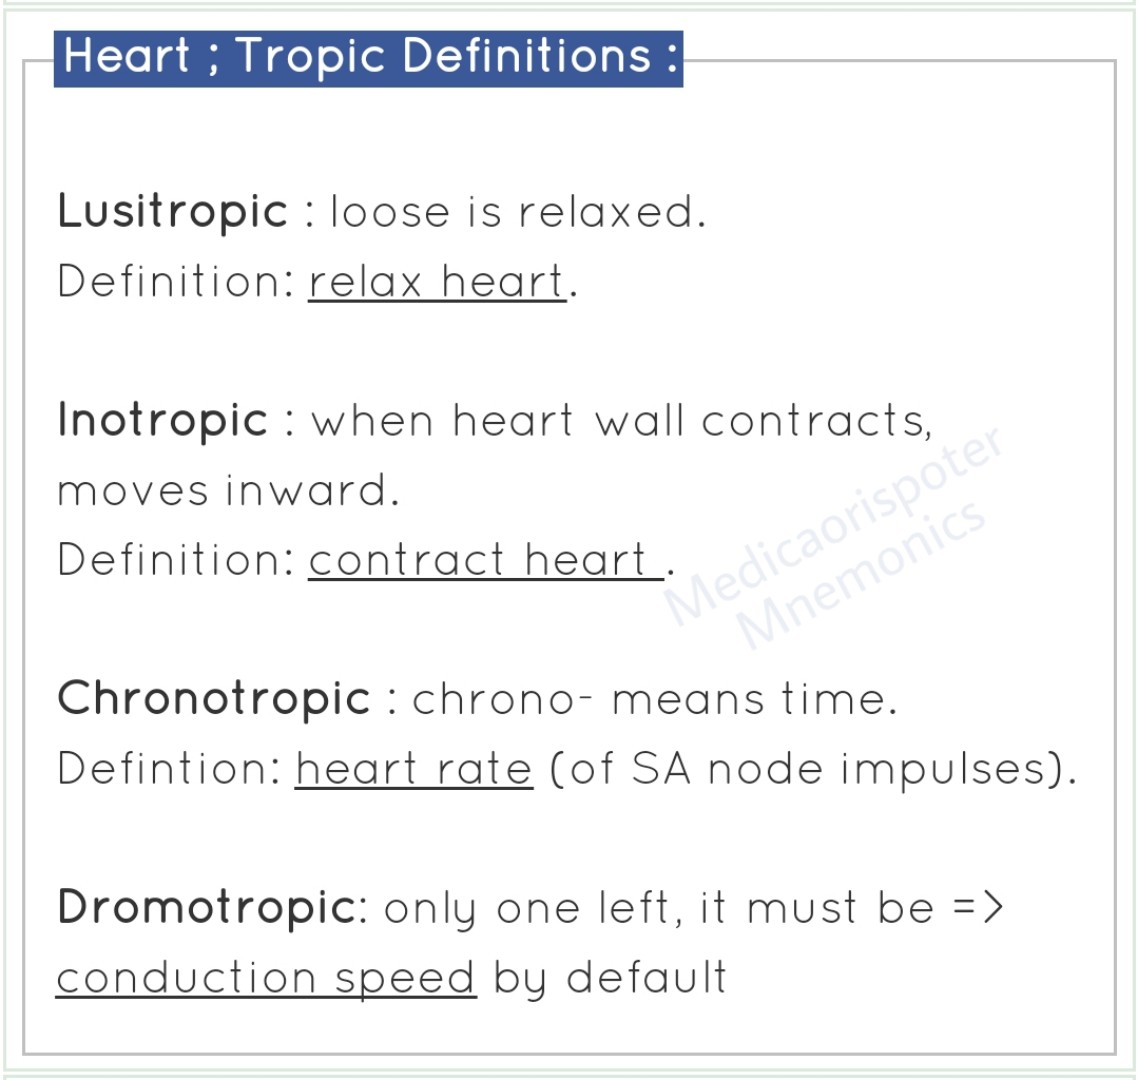 Tropic Definitions of Heart